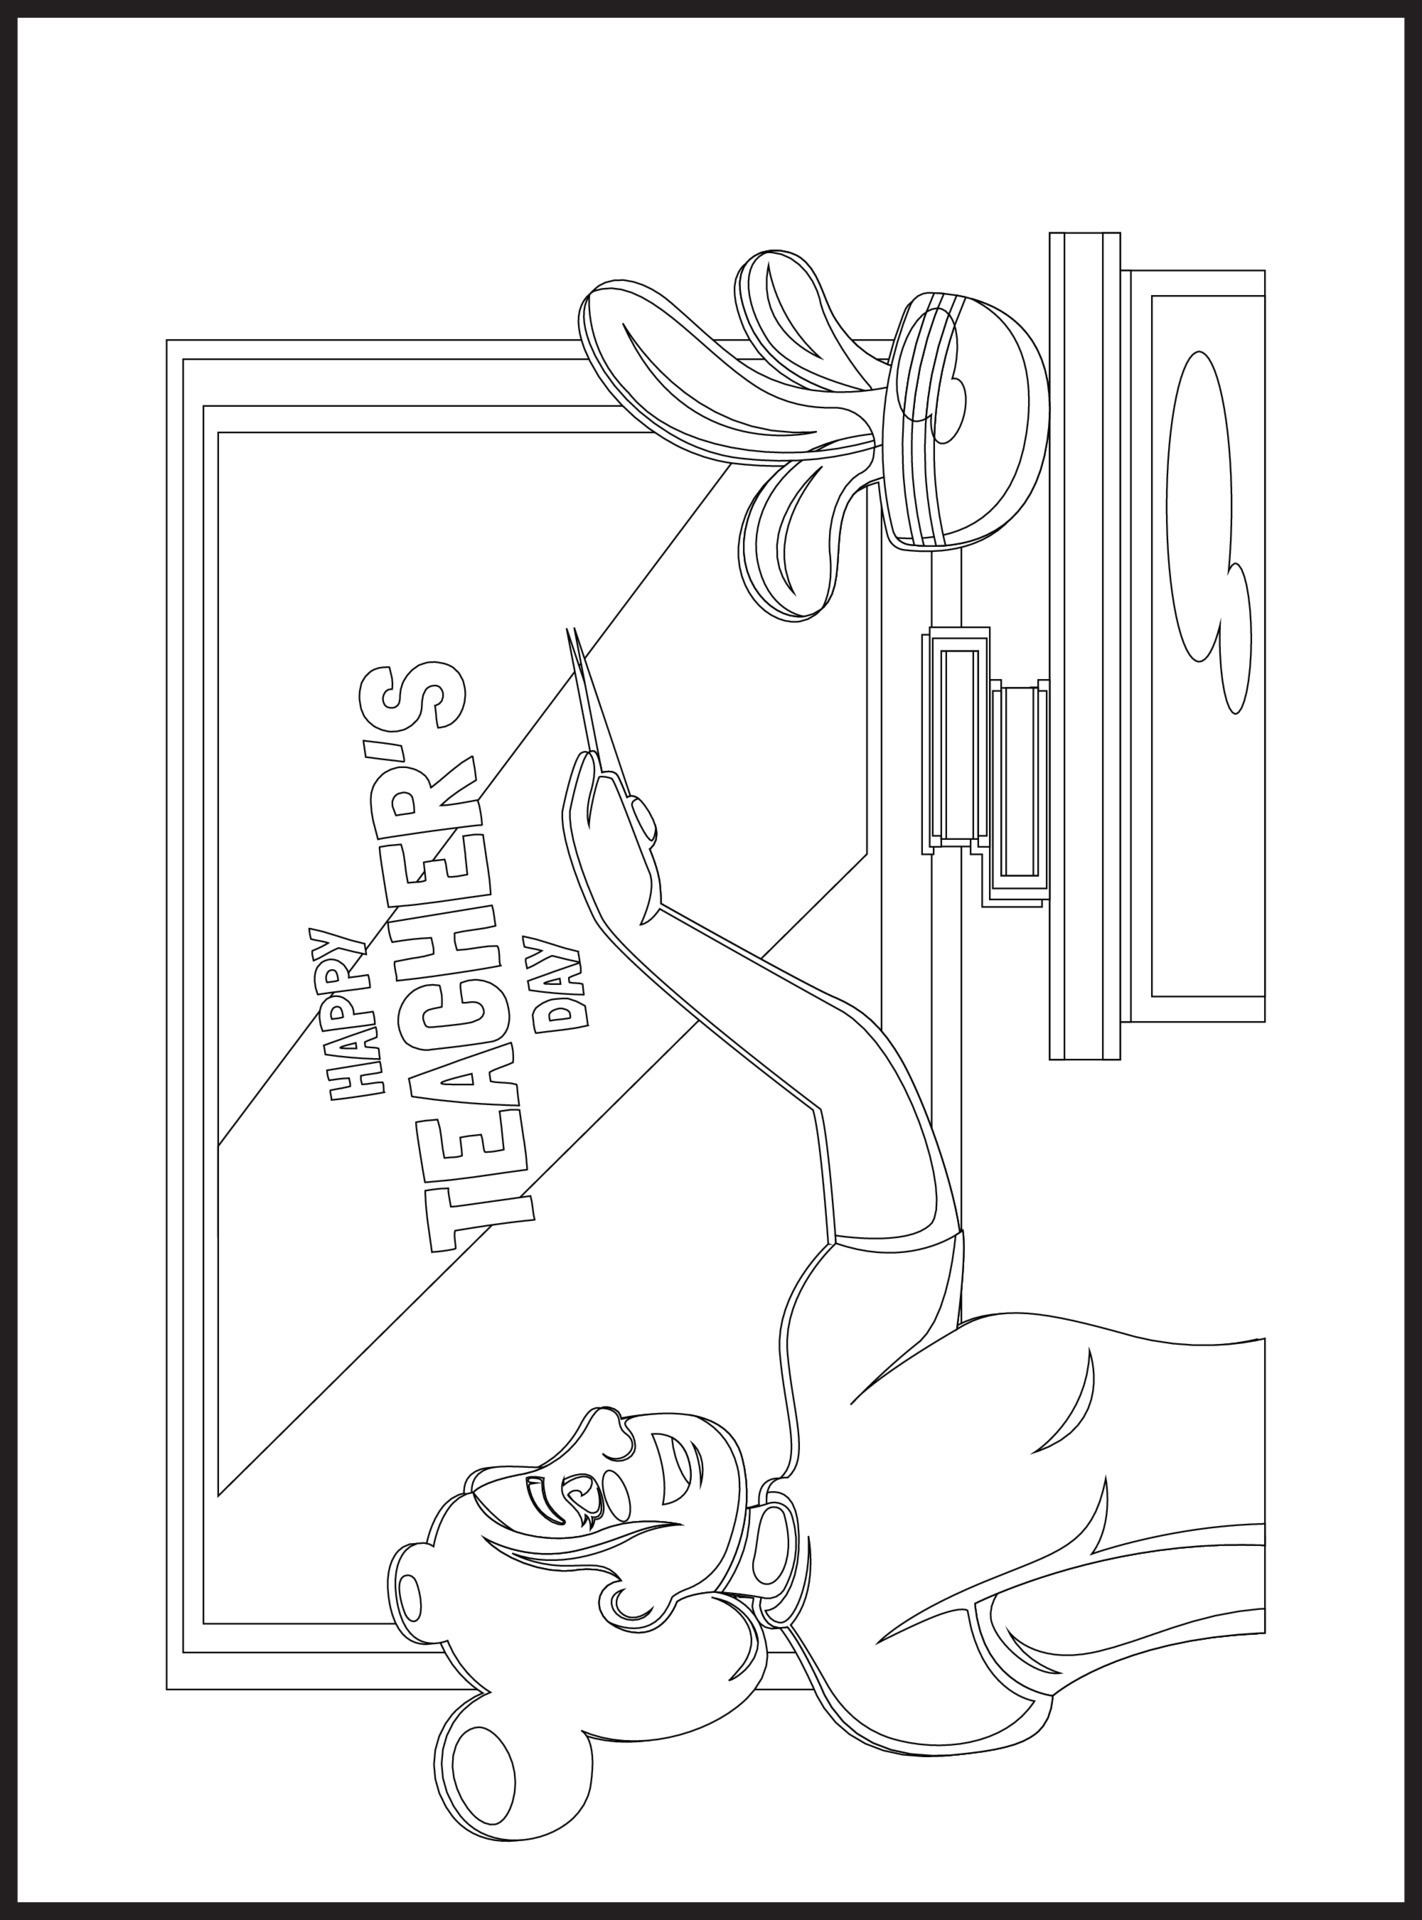 teachers-day-coloring-pages-23134476-vector-art-at-vecteezy